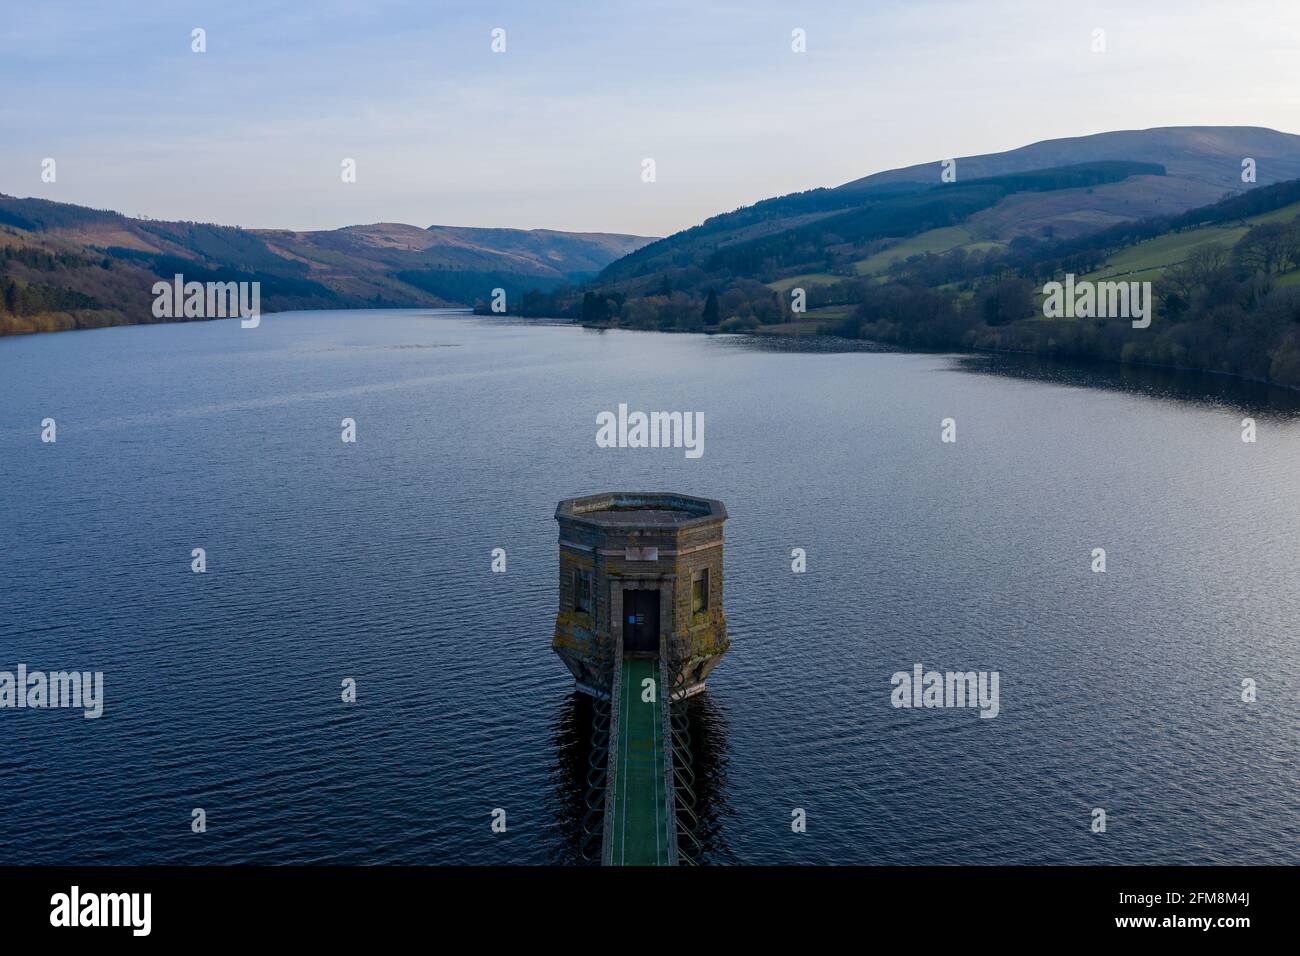 Talybont on Usk reservoir in the brecon beacons national park, Wales Stock Photo